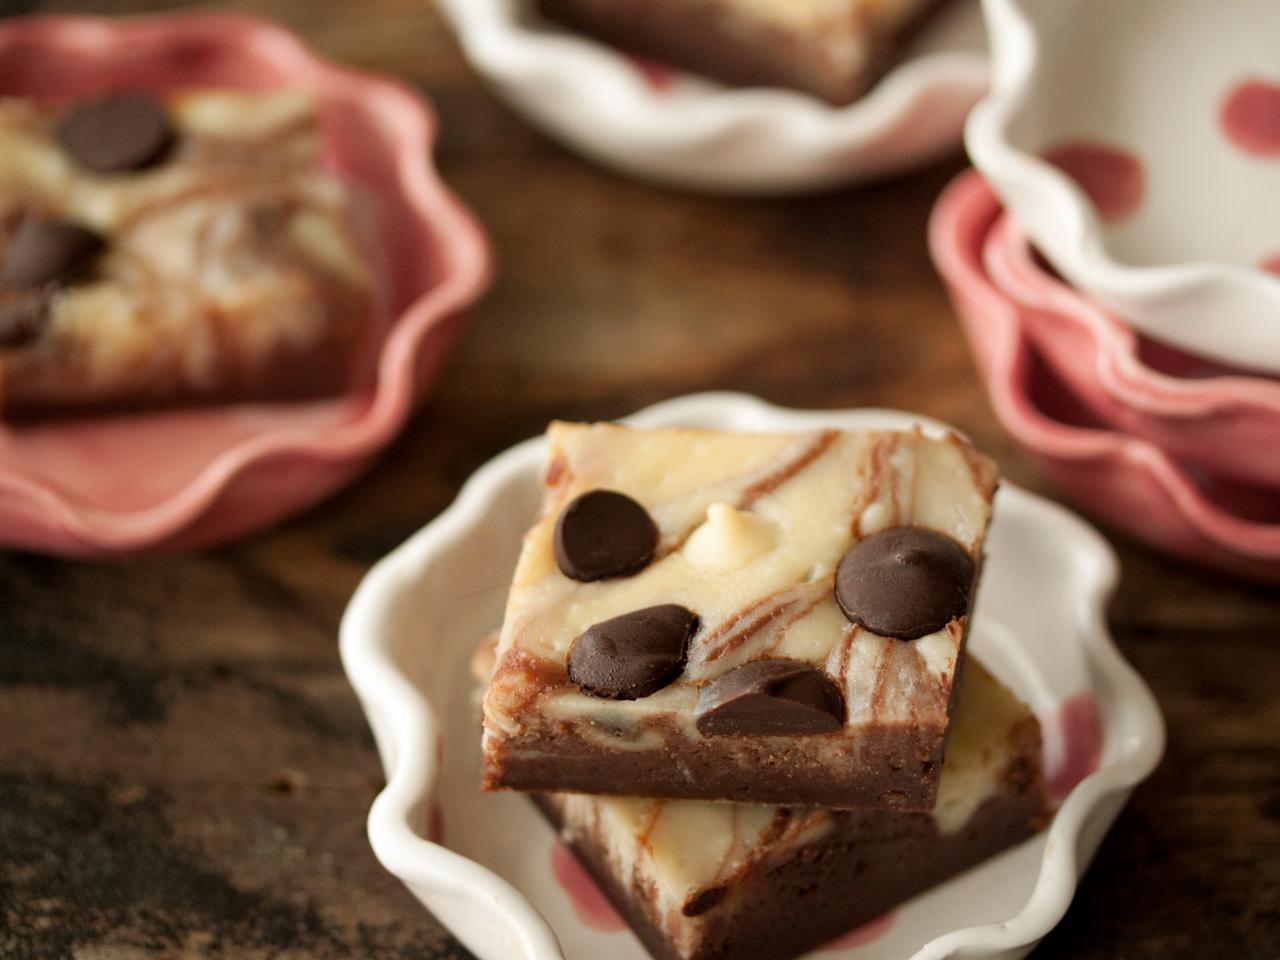 Cheesecake and brownies together? Count me in! Source: HGTV